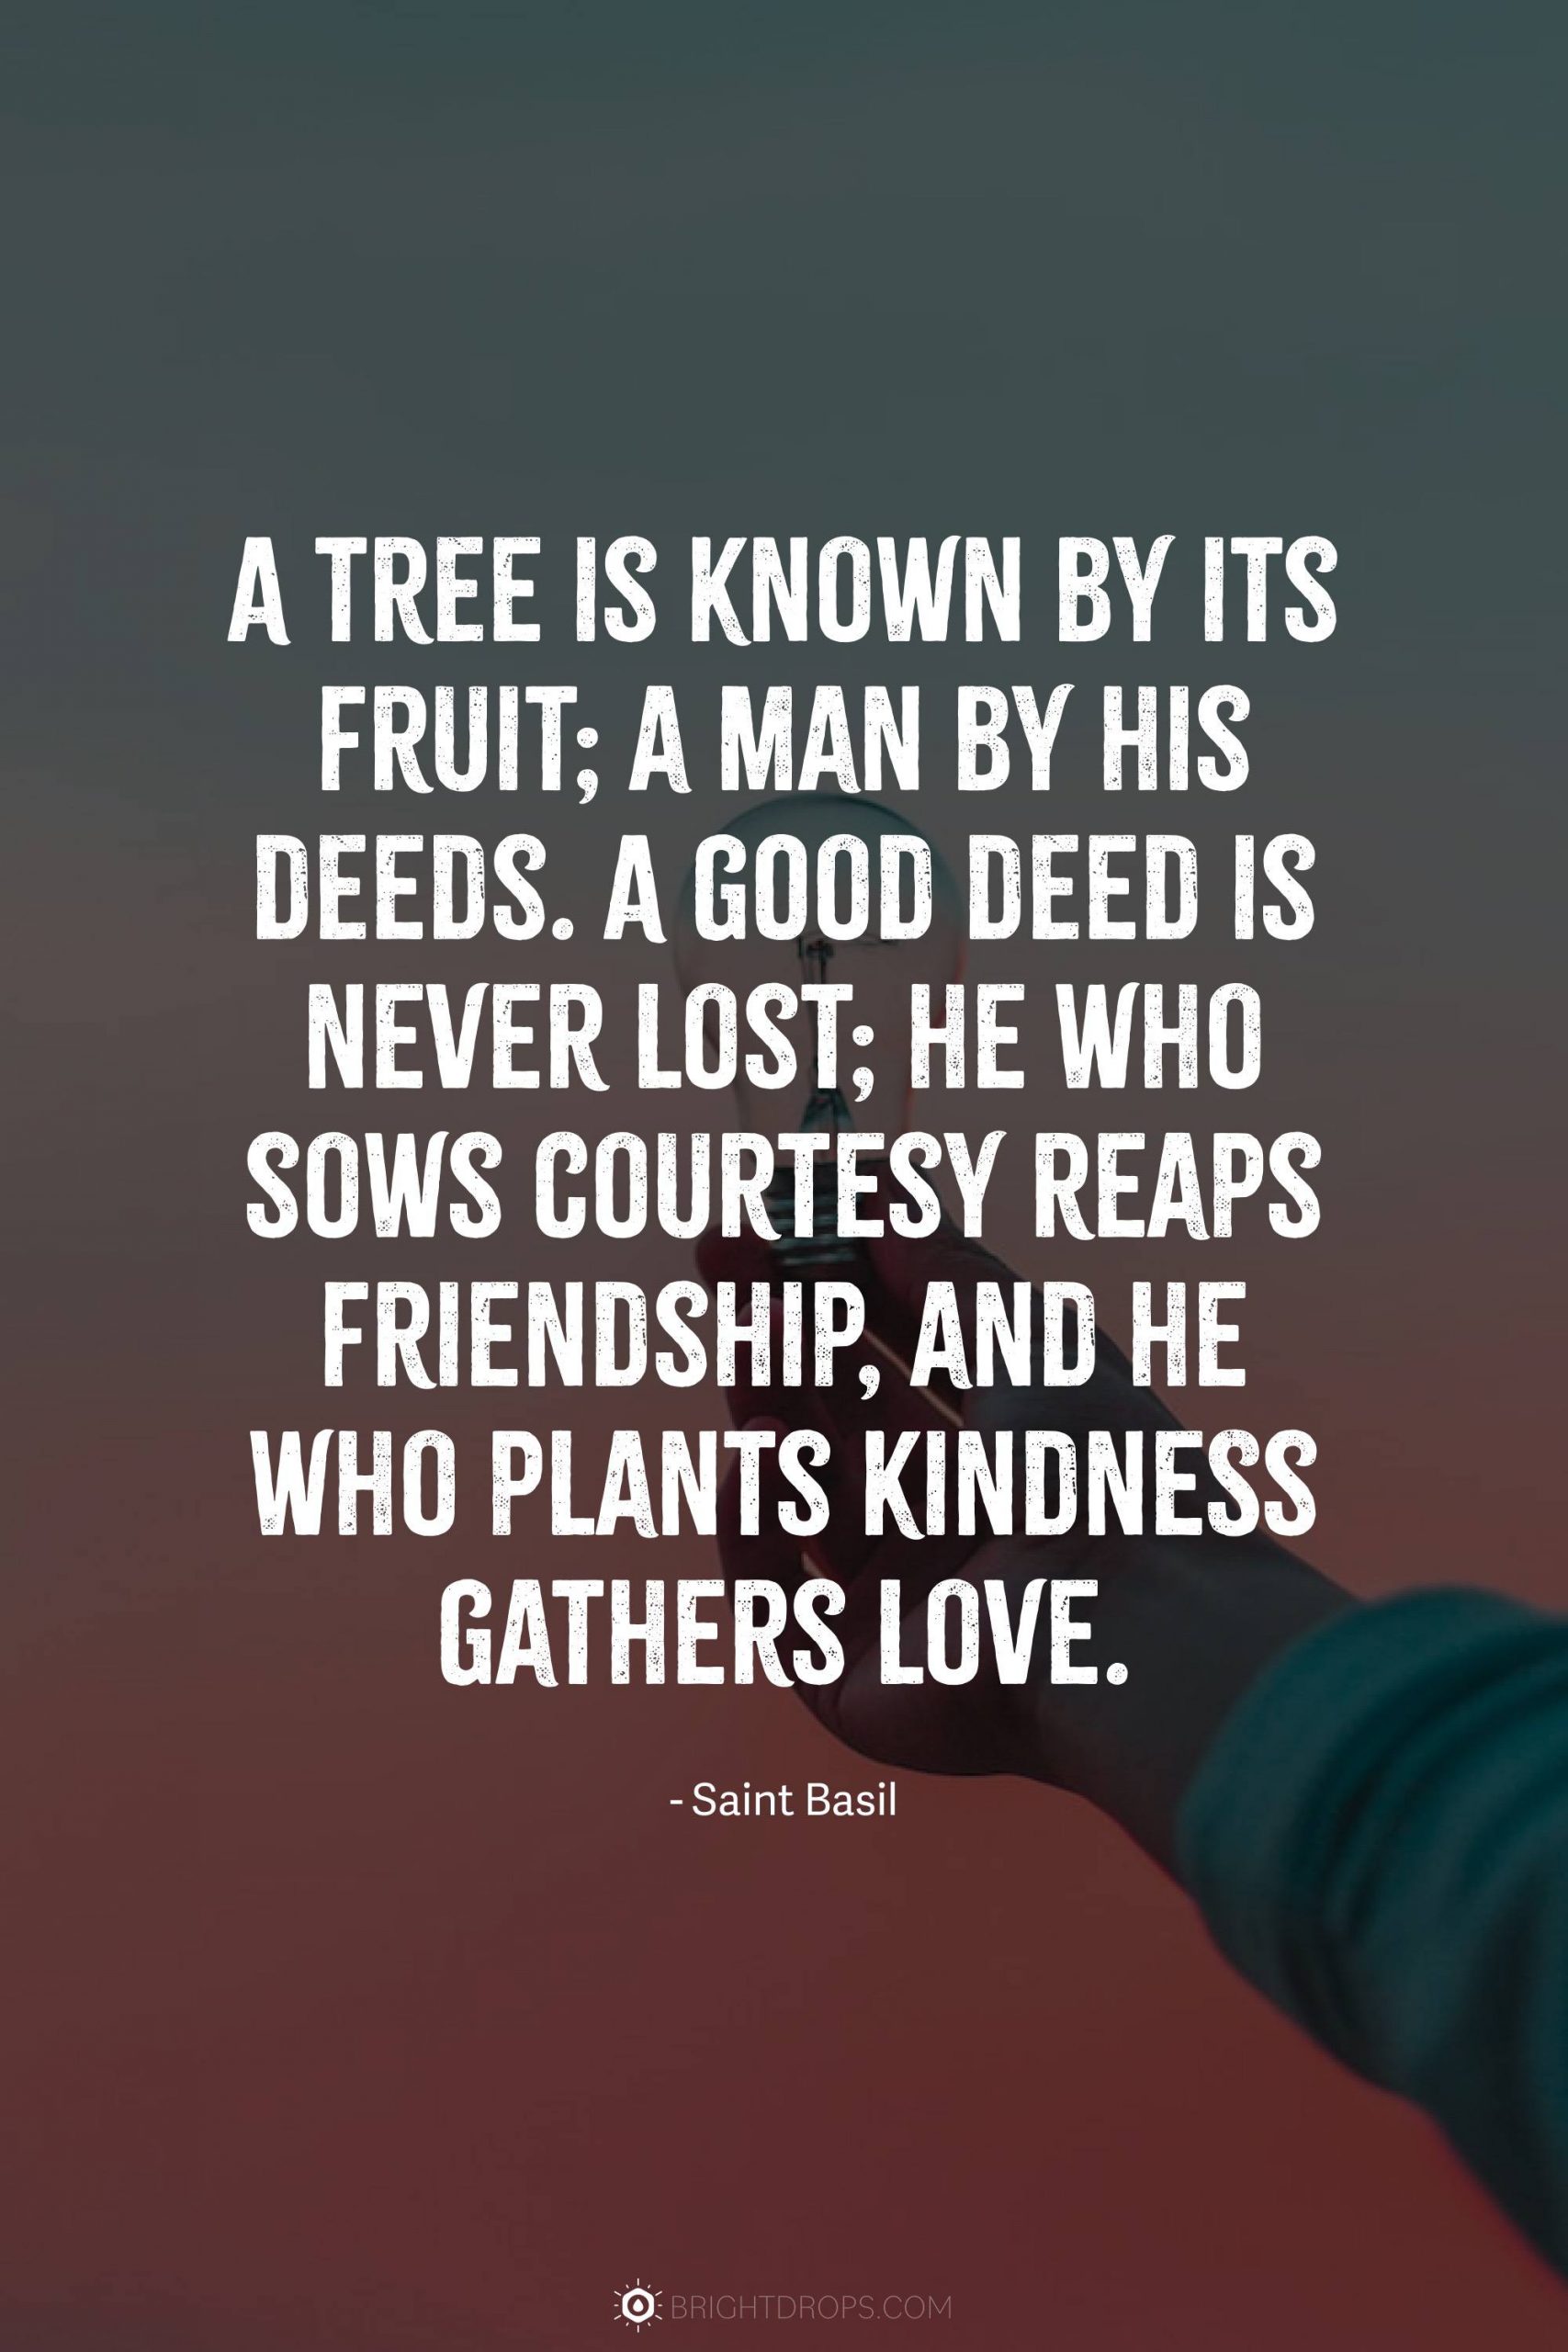 A tree is known by its fruit; a man by his deeds. A good deed is never lost; he who sows courtesy reaps friendship, and he who plants kindness gathers love.